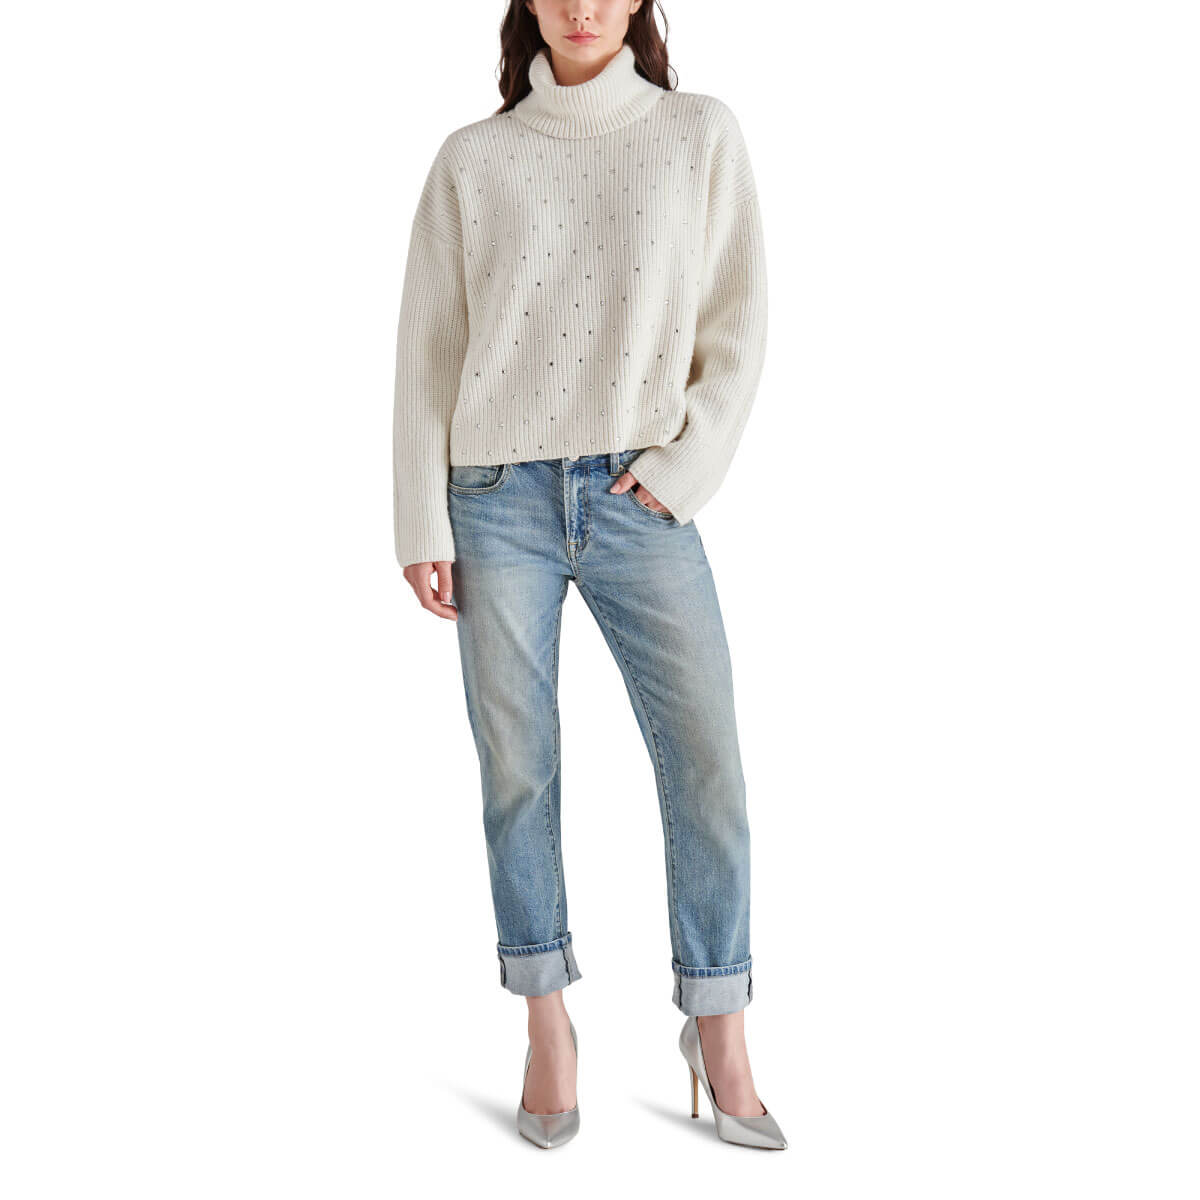 Steve Madden Astro Sequin Turtle Neck Sweater white front | MILK MONEY milkmoney.co | cute sweaters for women, cute knit sweaters, cute pullover sweaters